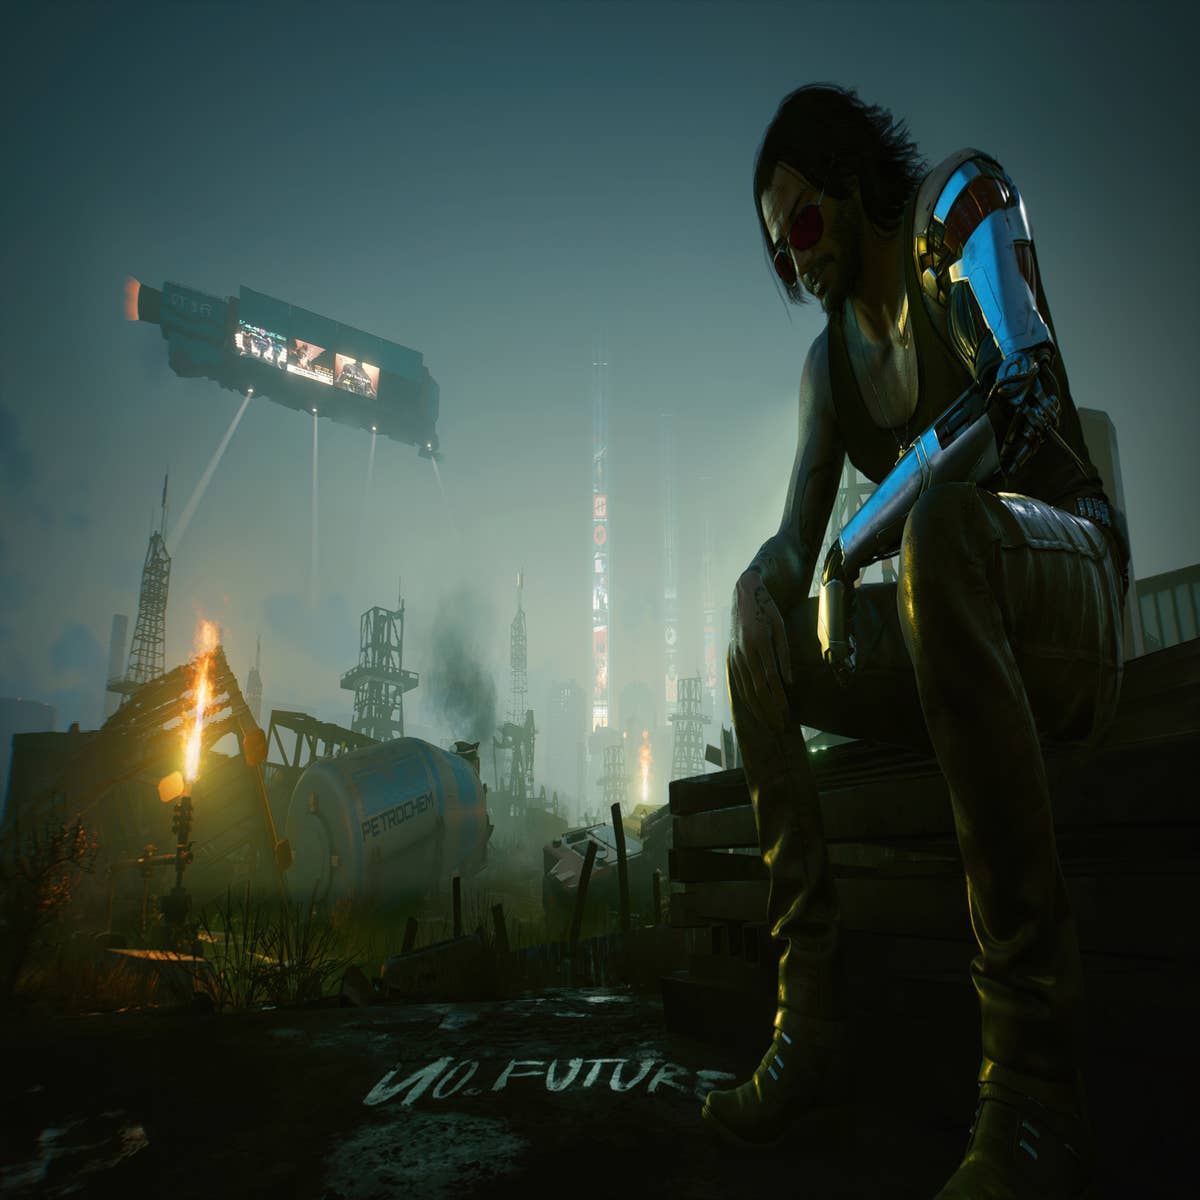 Cyberpunk 2077 Patch 1.5 details and patch notes